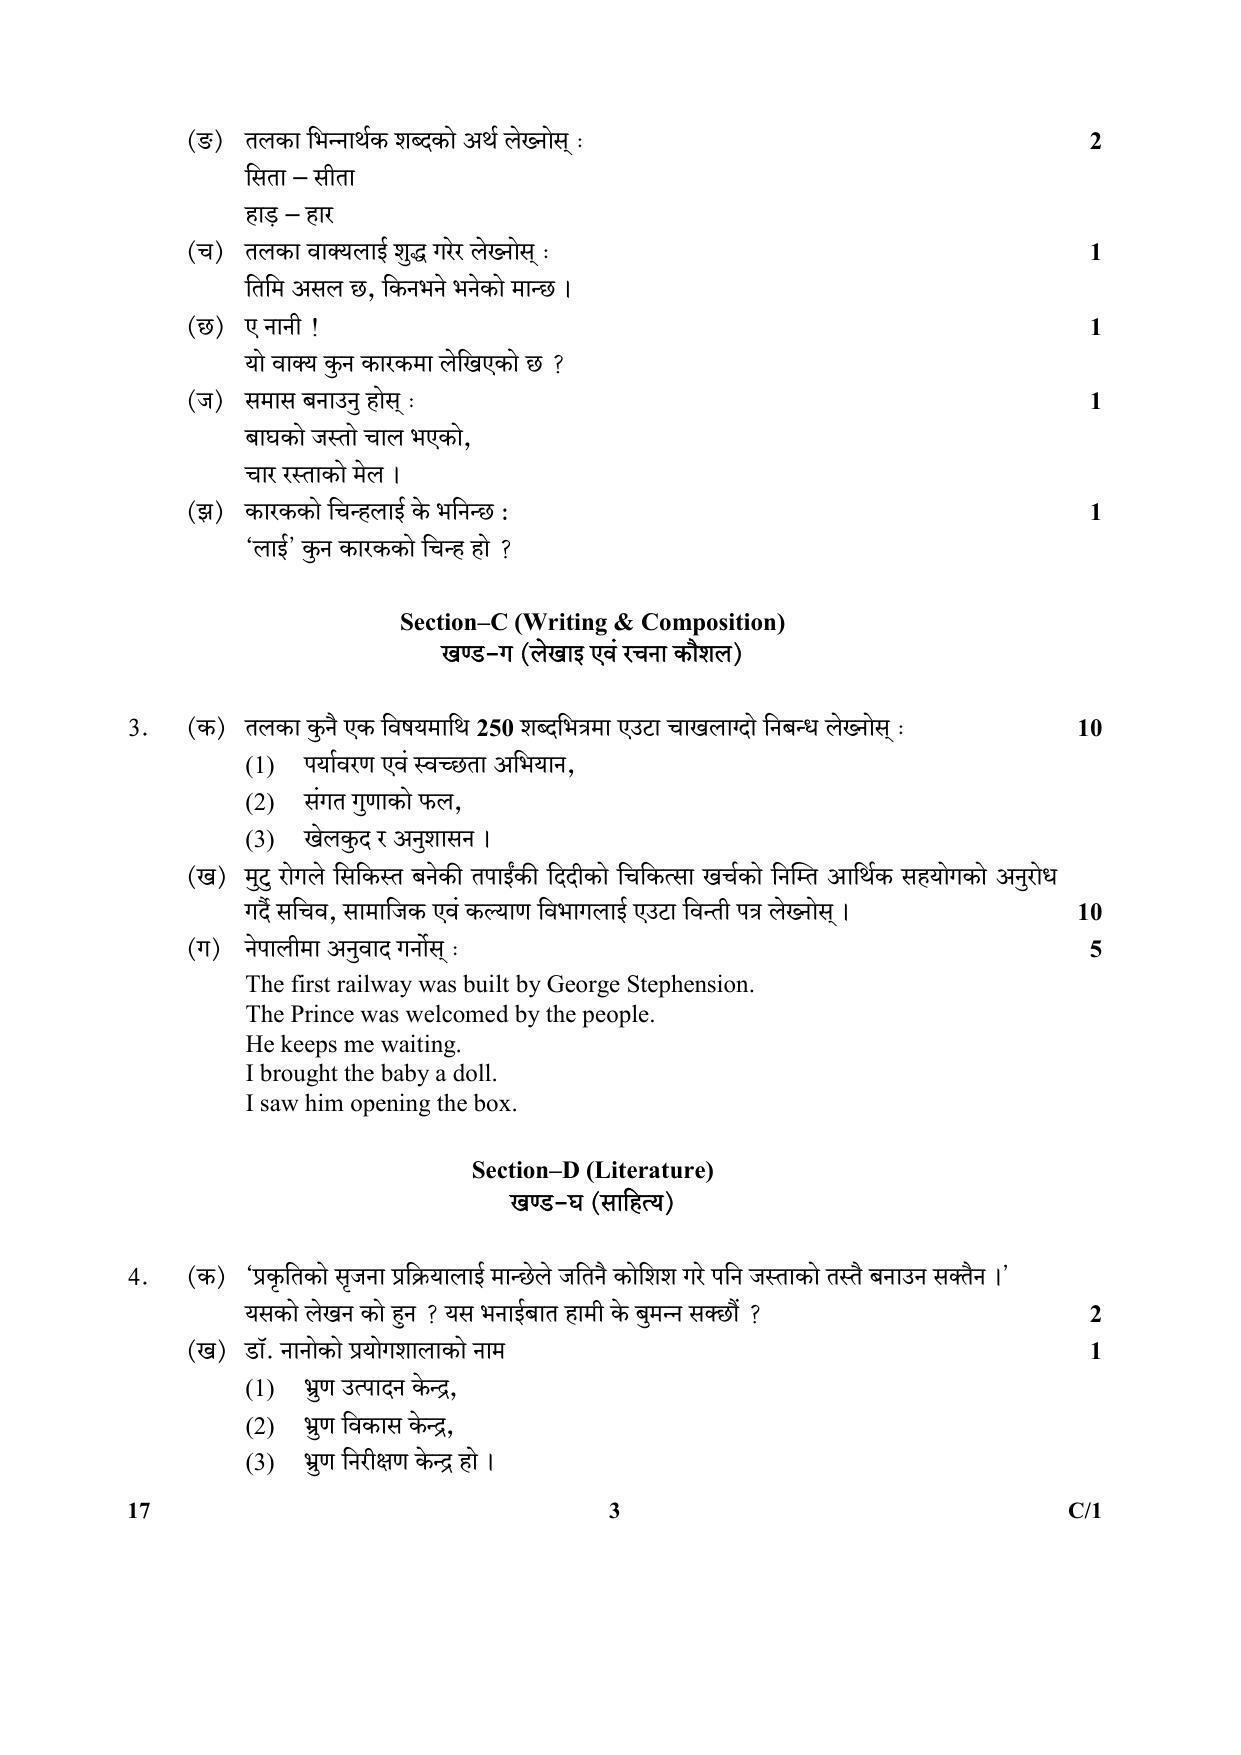 CBSE Class 10 17 (Nepali) 2018 Compartment Question Paper - Page 3